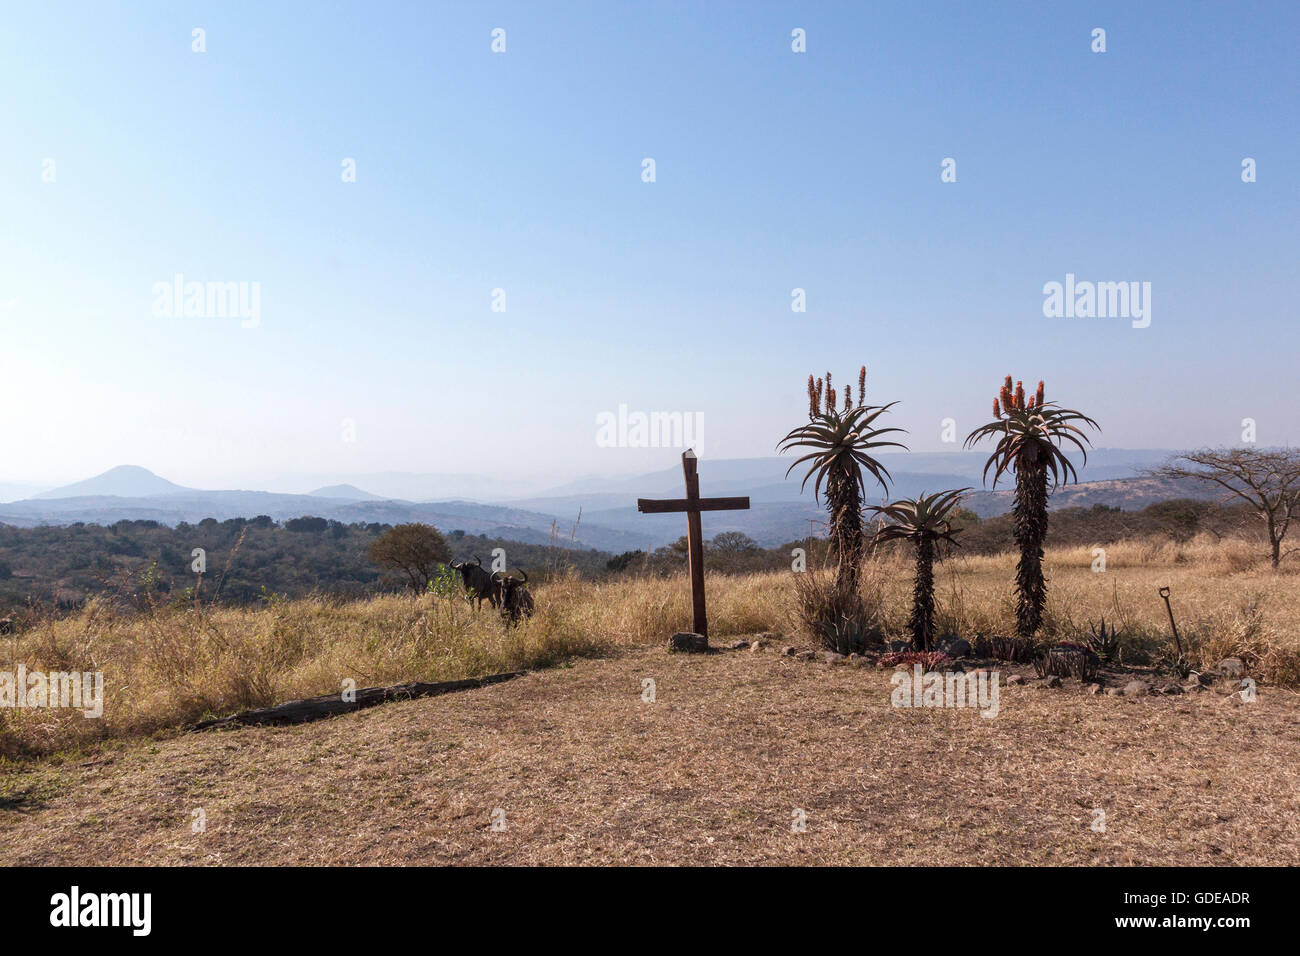 Large wood cross and flowering aloes in dry arid winter landscape with wildebeest looking on in South Africa Stock Photo